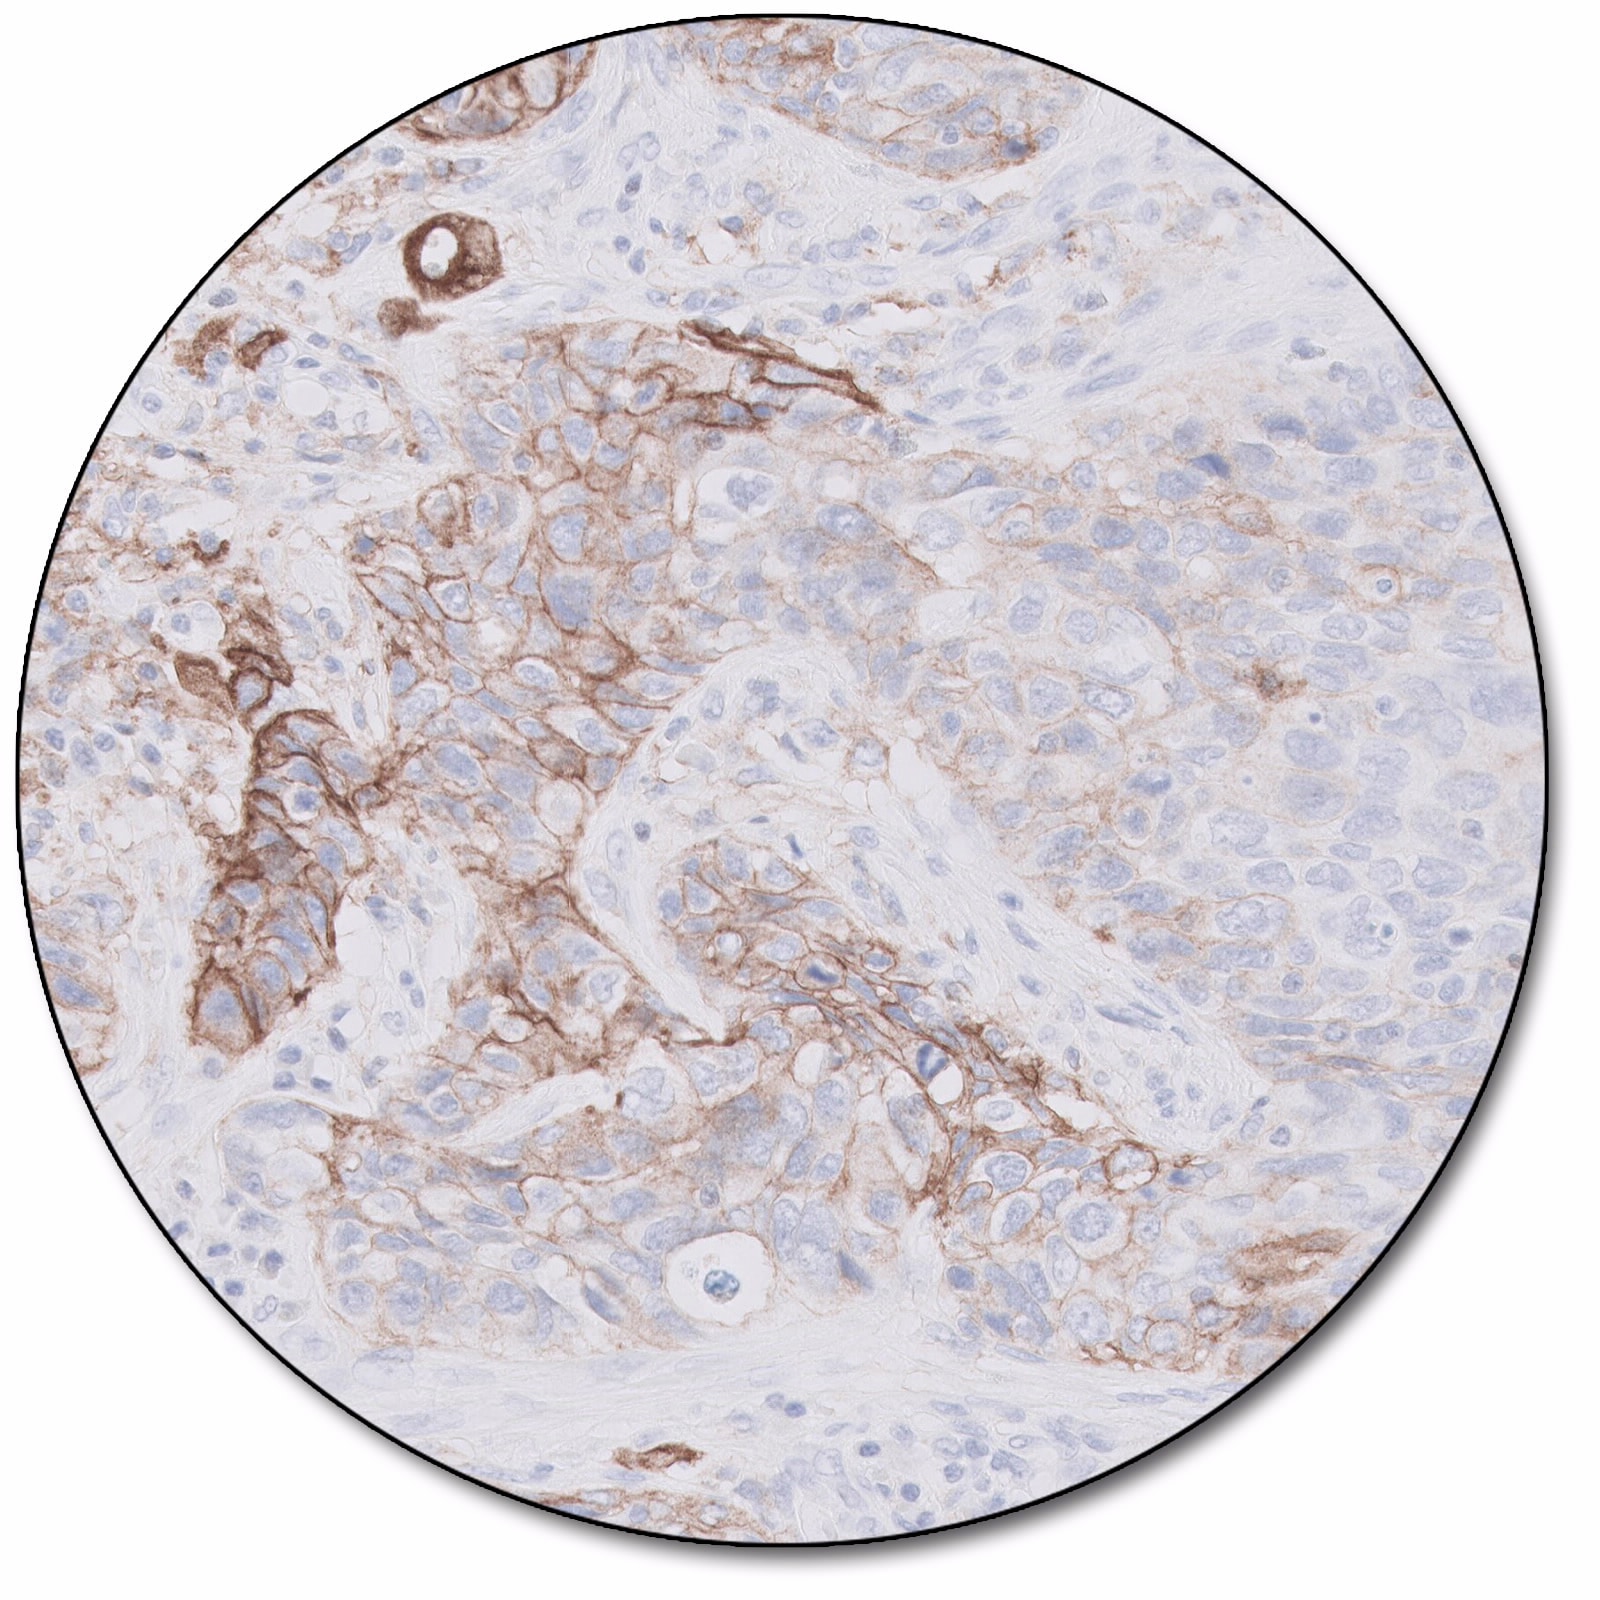 PD-L1 IHC 22C3 pharmDx「ダコ」：ダコ<br><br>Autostainer Link 48 用 PD-L1 検査キット